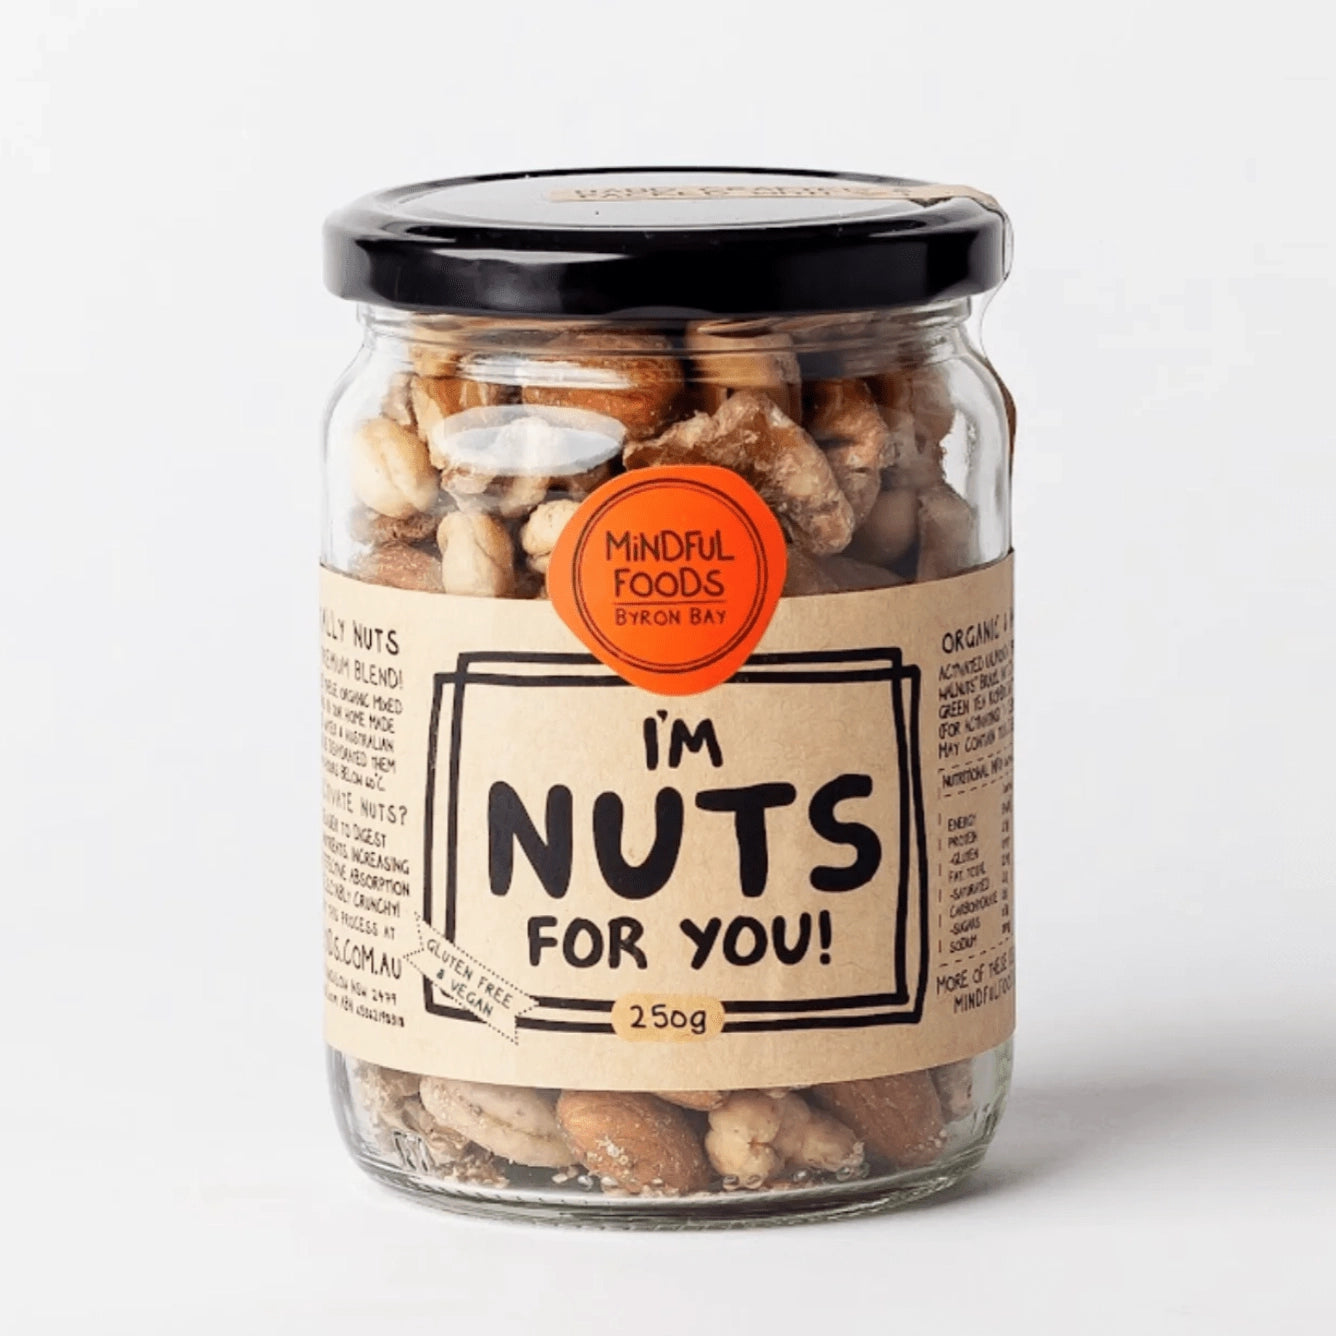 Mindful Foods I'm Nuts for you Product Image